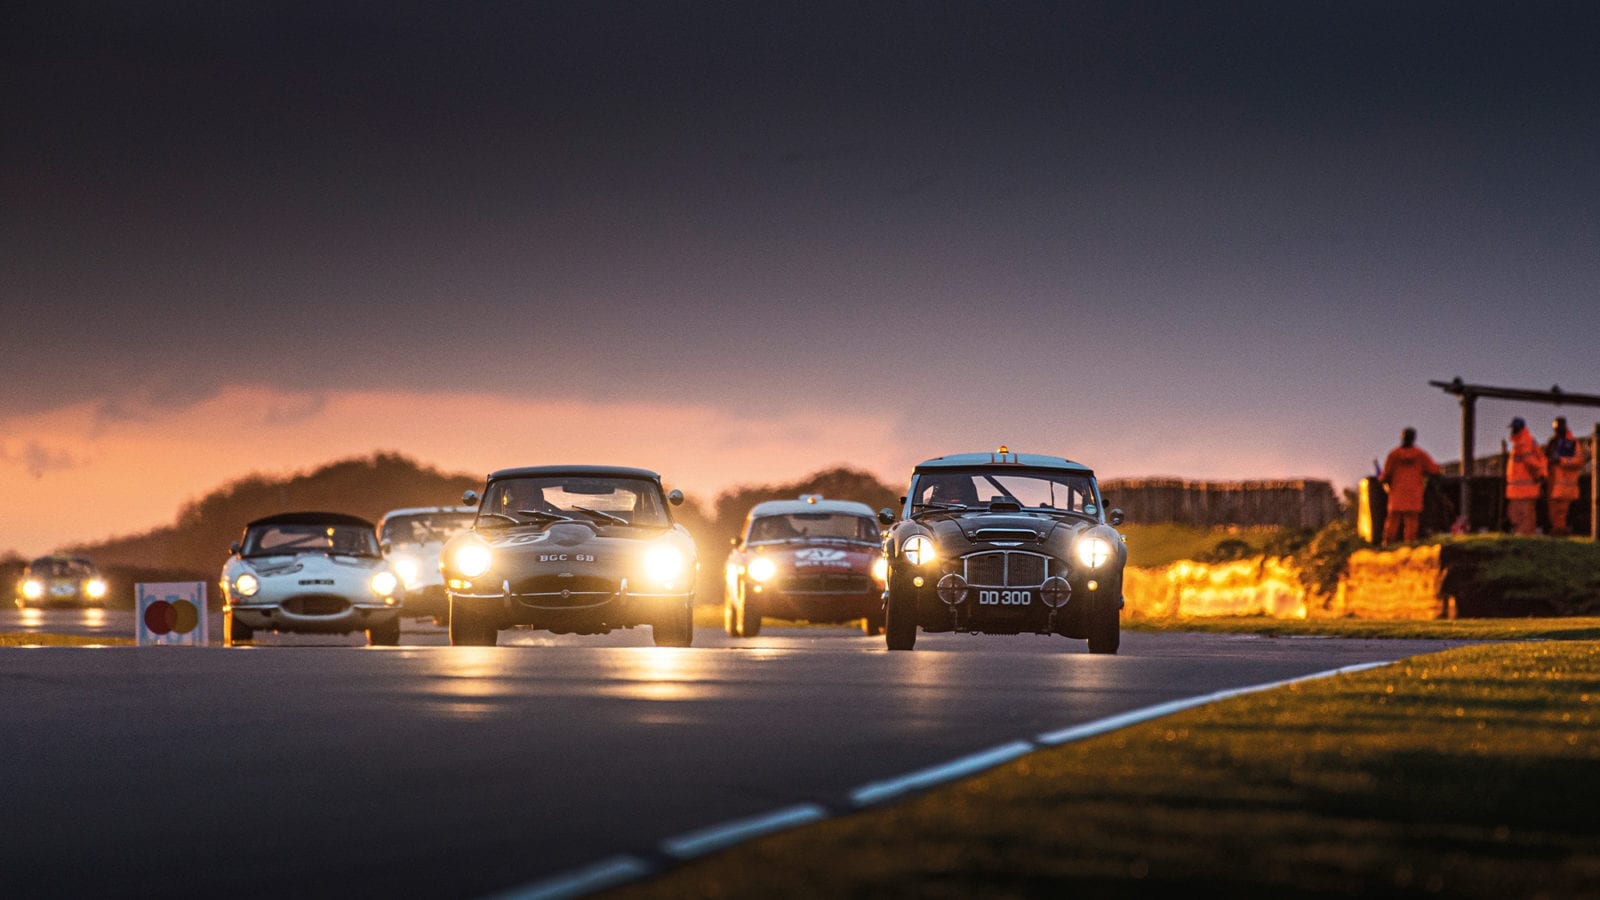 Stirling Moss Memorial Trophy race in the dusk at Goodwood SpeedWeek